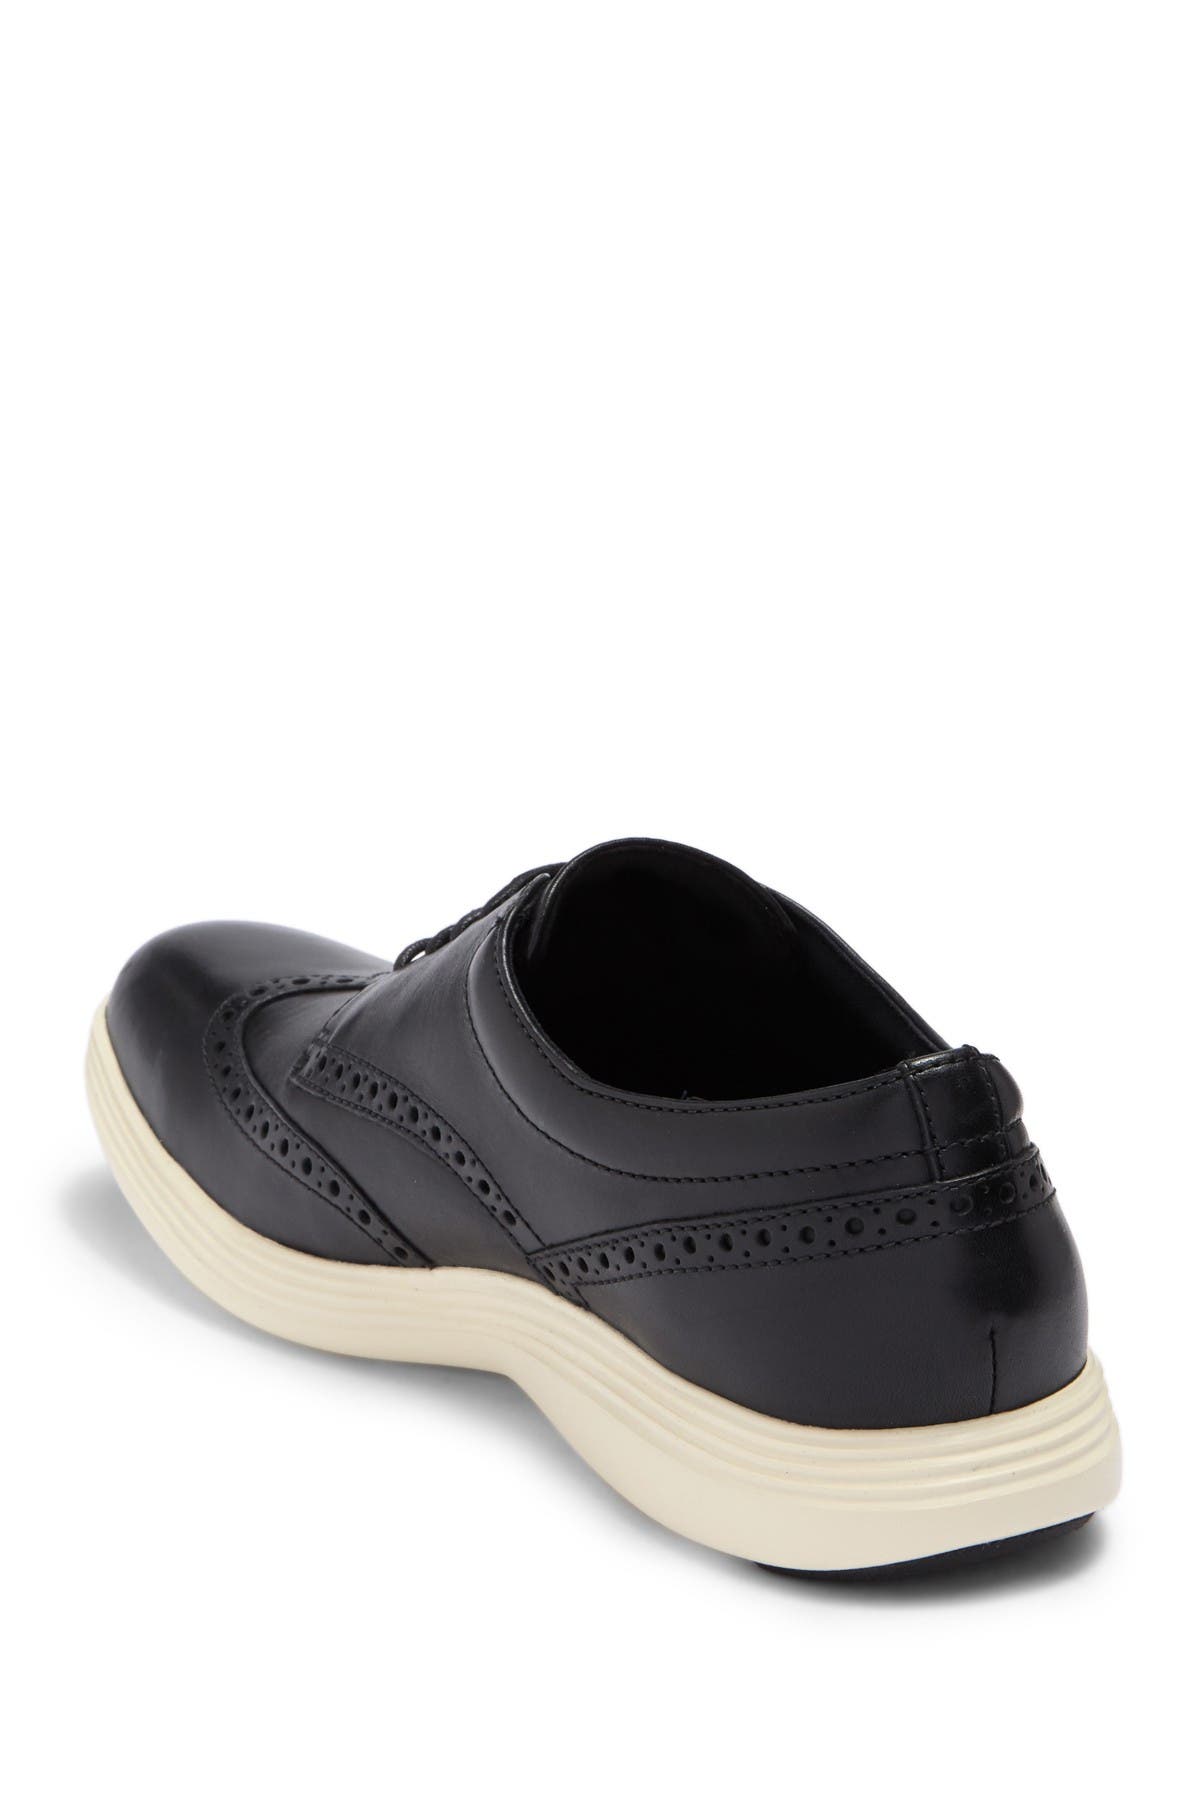 cole haan grand tour wing ox